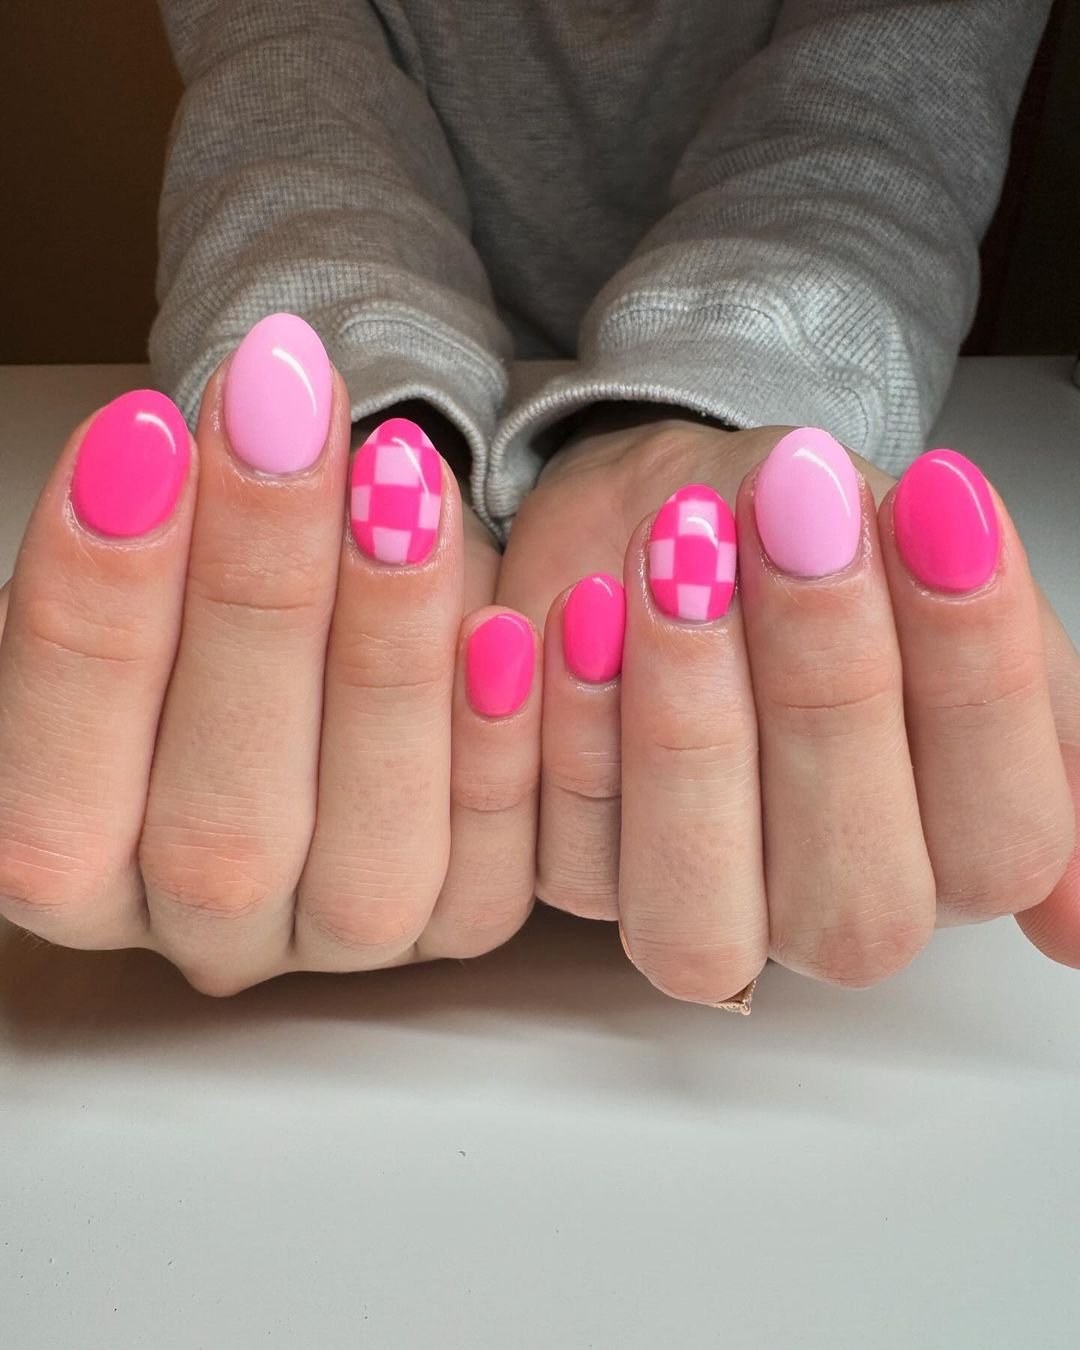 5 - Picture of Checkered Nails